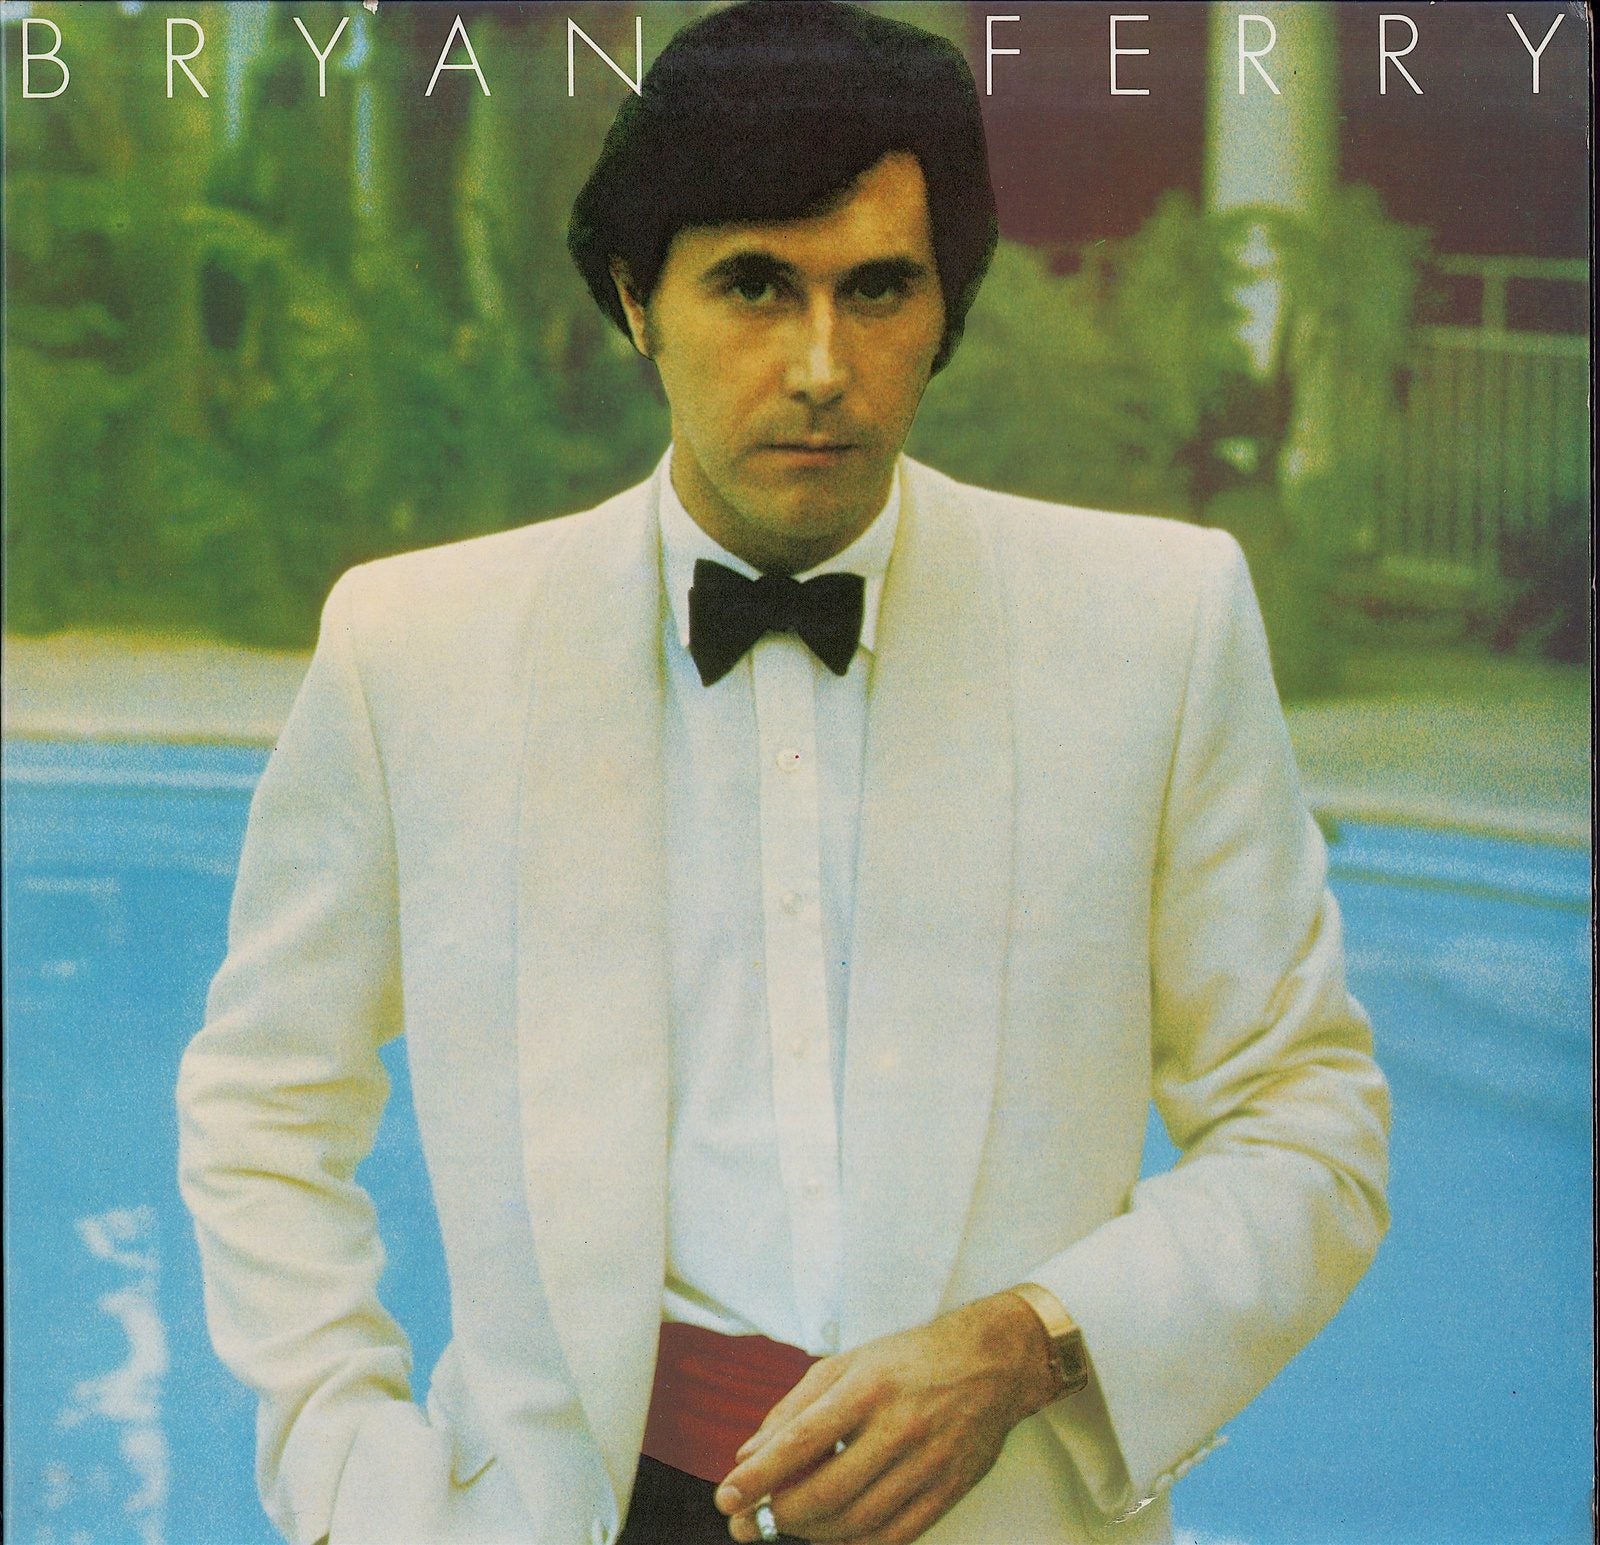 Bryan Ferry - Another Time, Another Place (Vinyl LP)